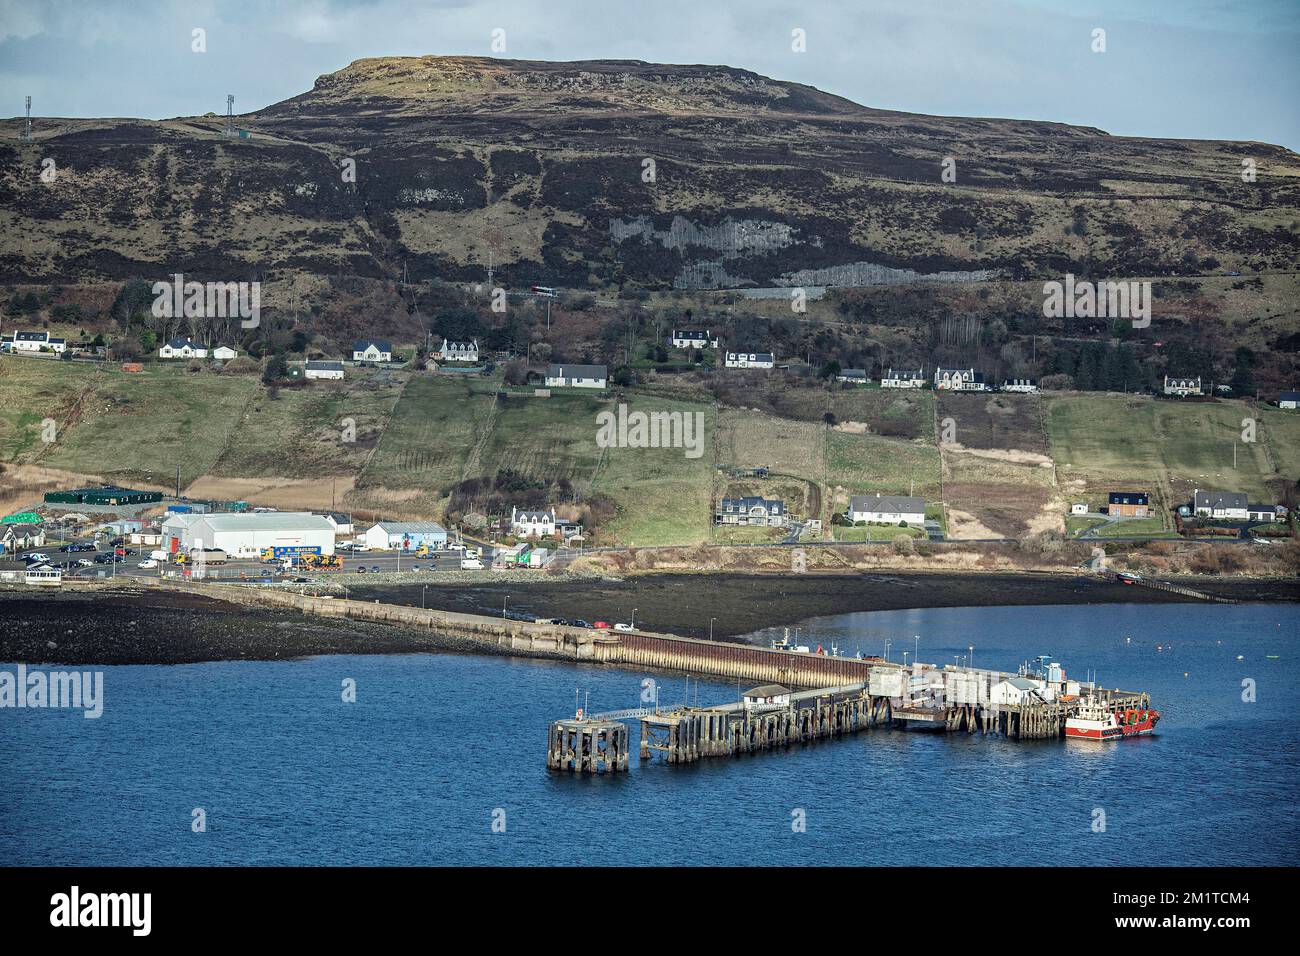 A boat alongside the Jetty at Uig, Isle of Skye, with the village and Cuillin hills behind. Stock Photo